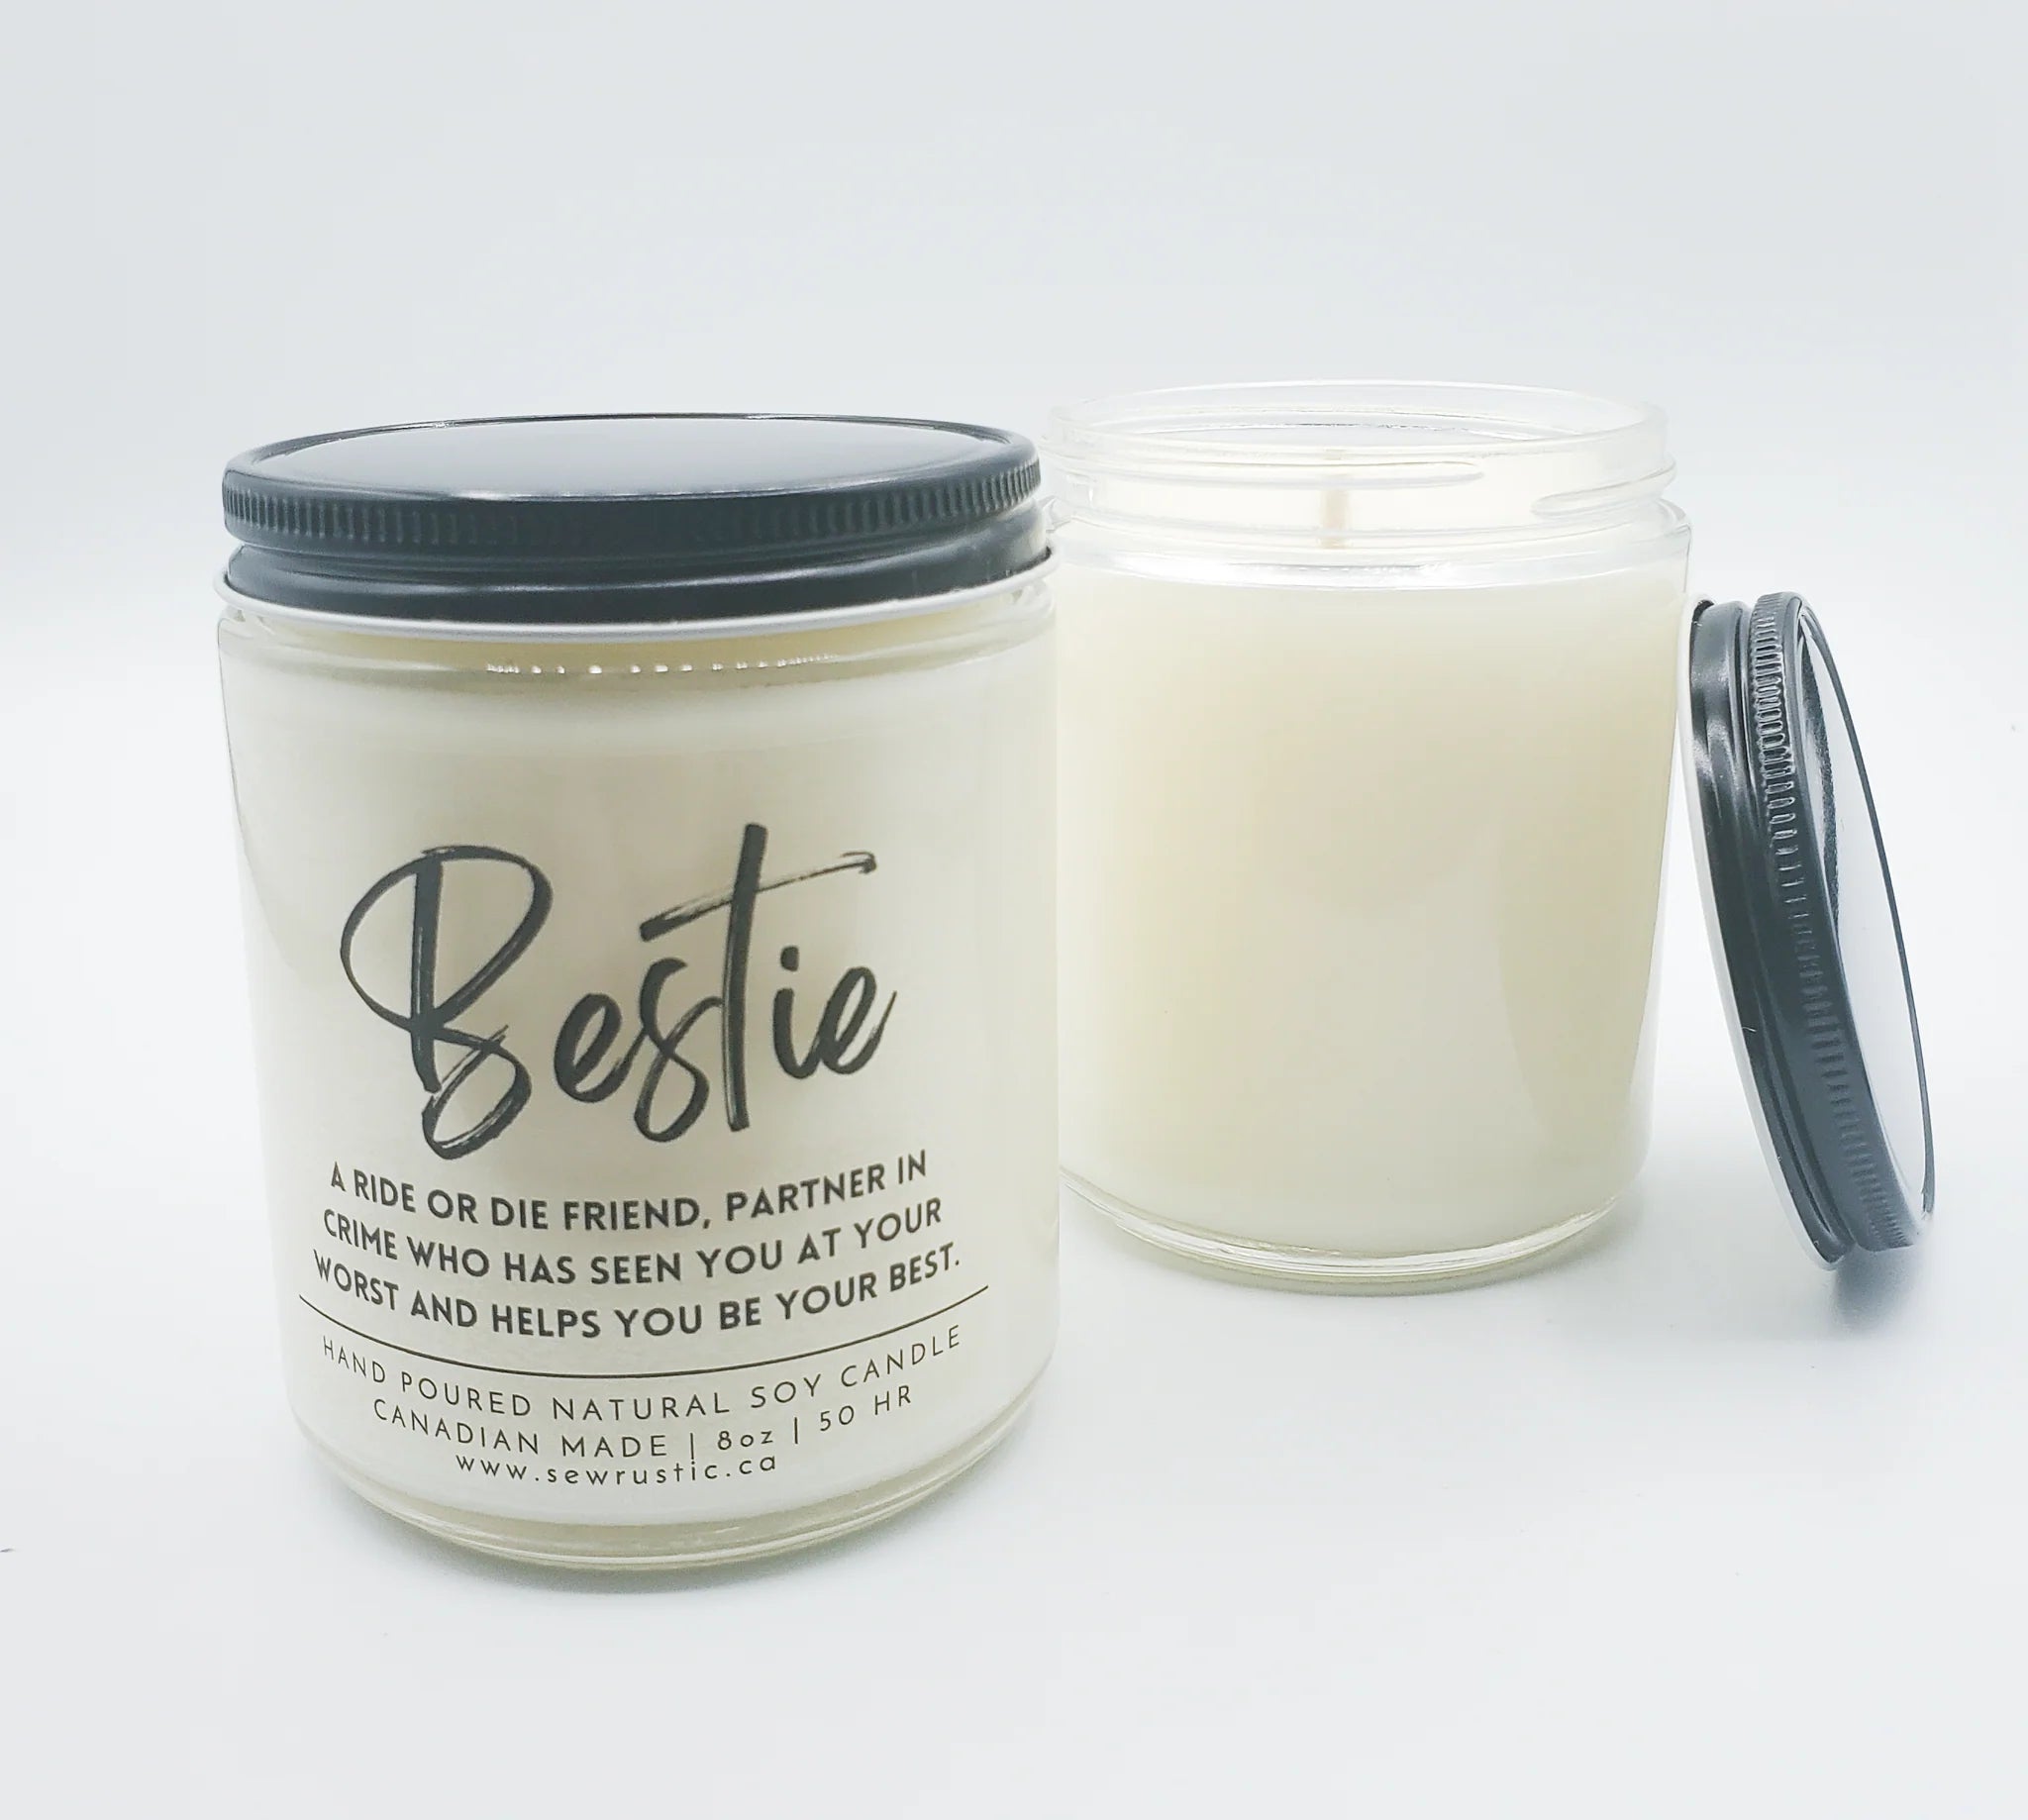 8oz Sew Rustic Soy Candle